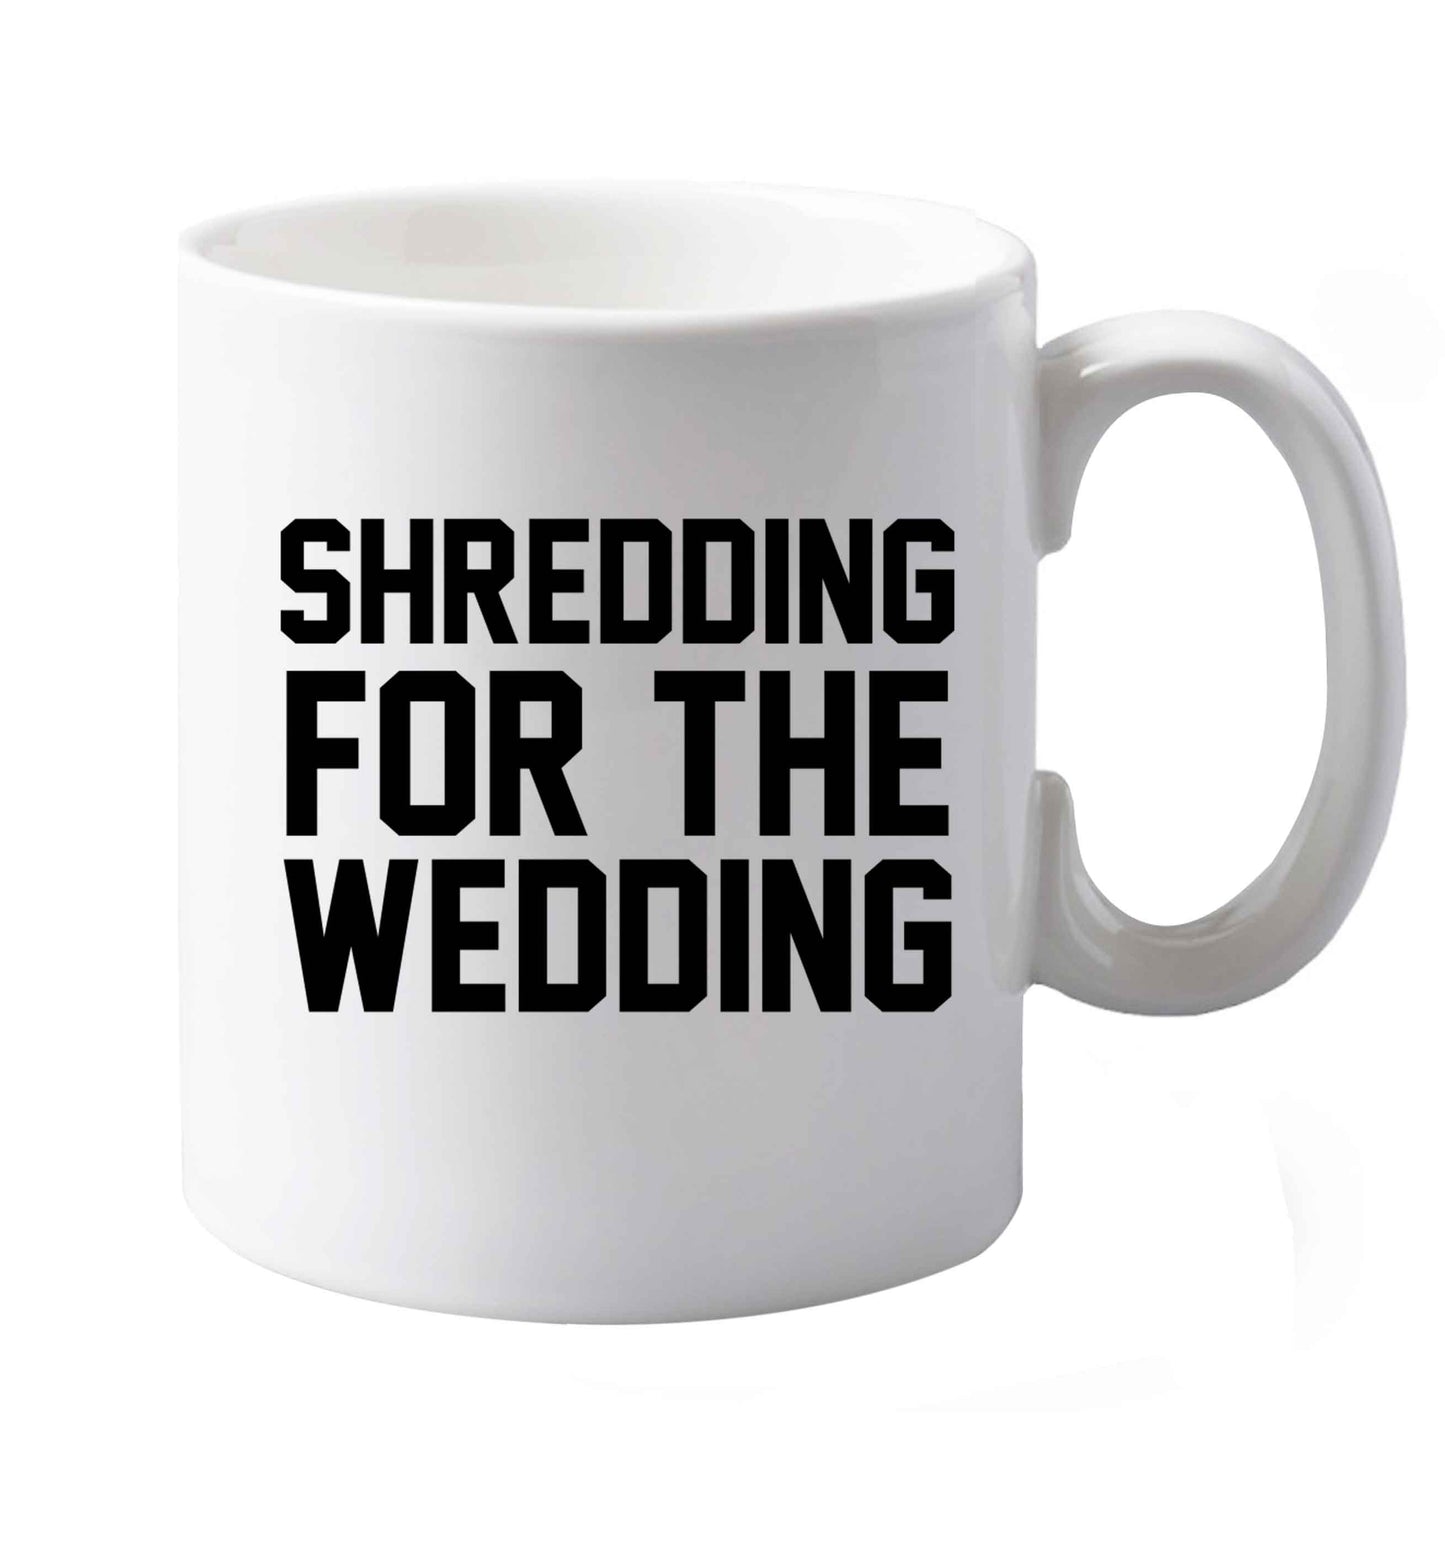 10 oz Get motivated and get fit for your big day! Our workout quotes and designs will get you ready to sweat! Perfect for any bride, groom or bridesmaid to be!    ceramic mug both sides